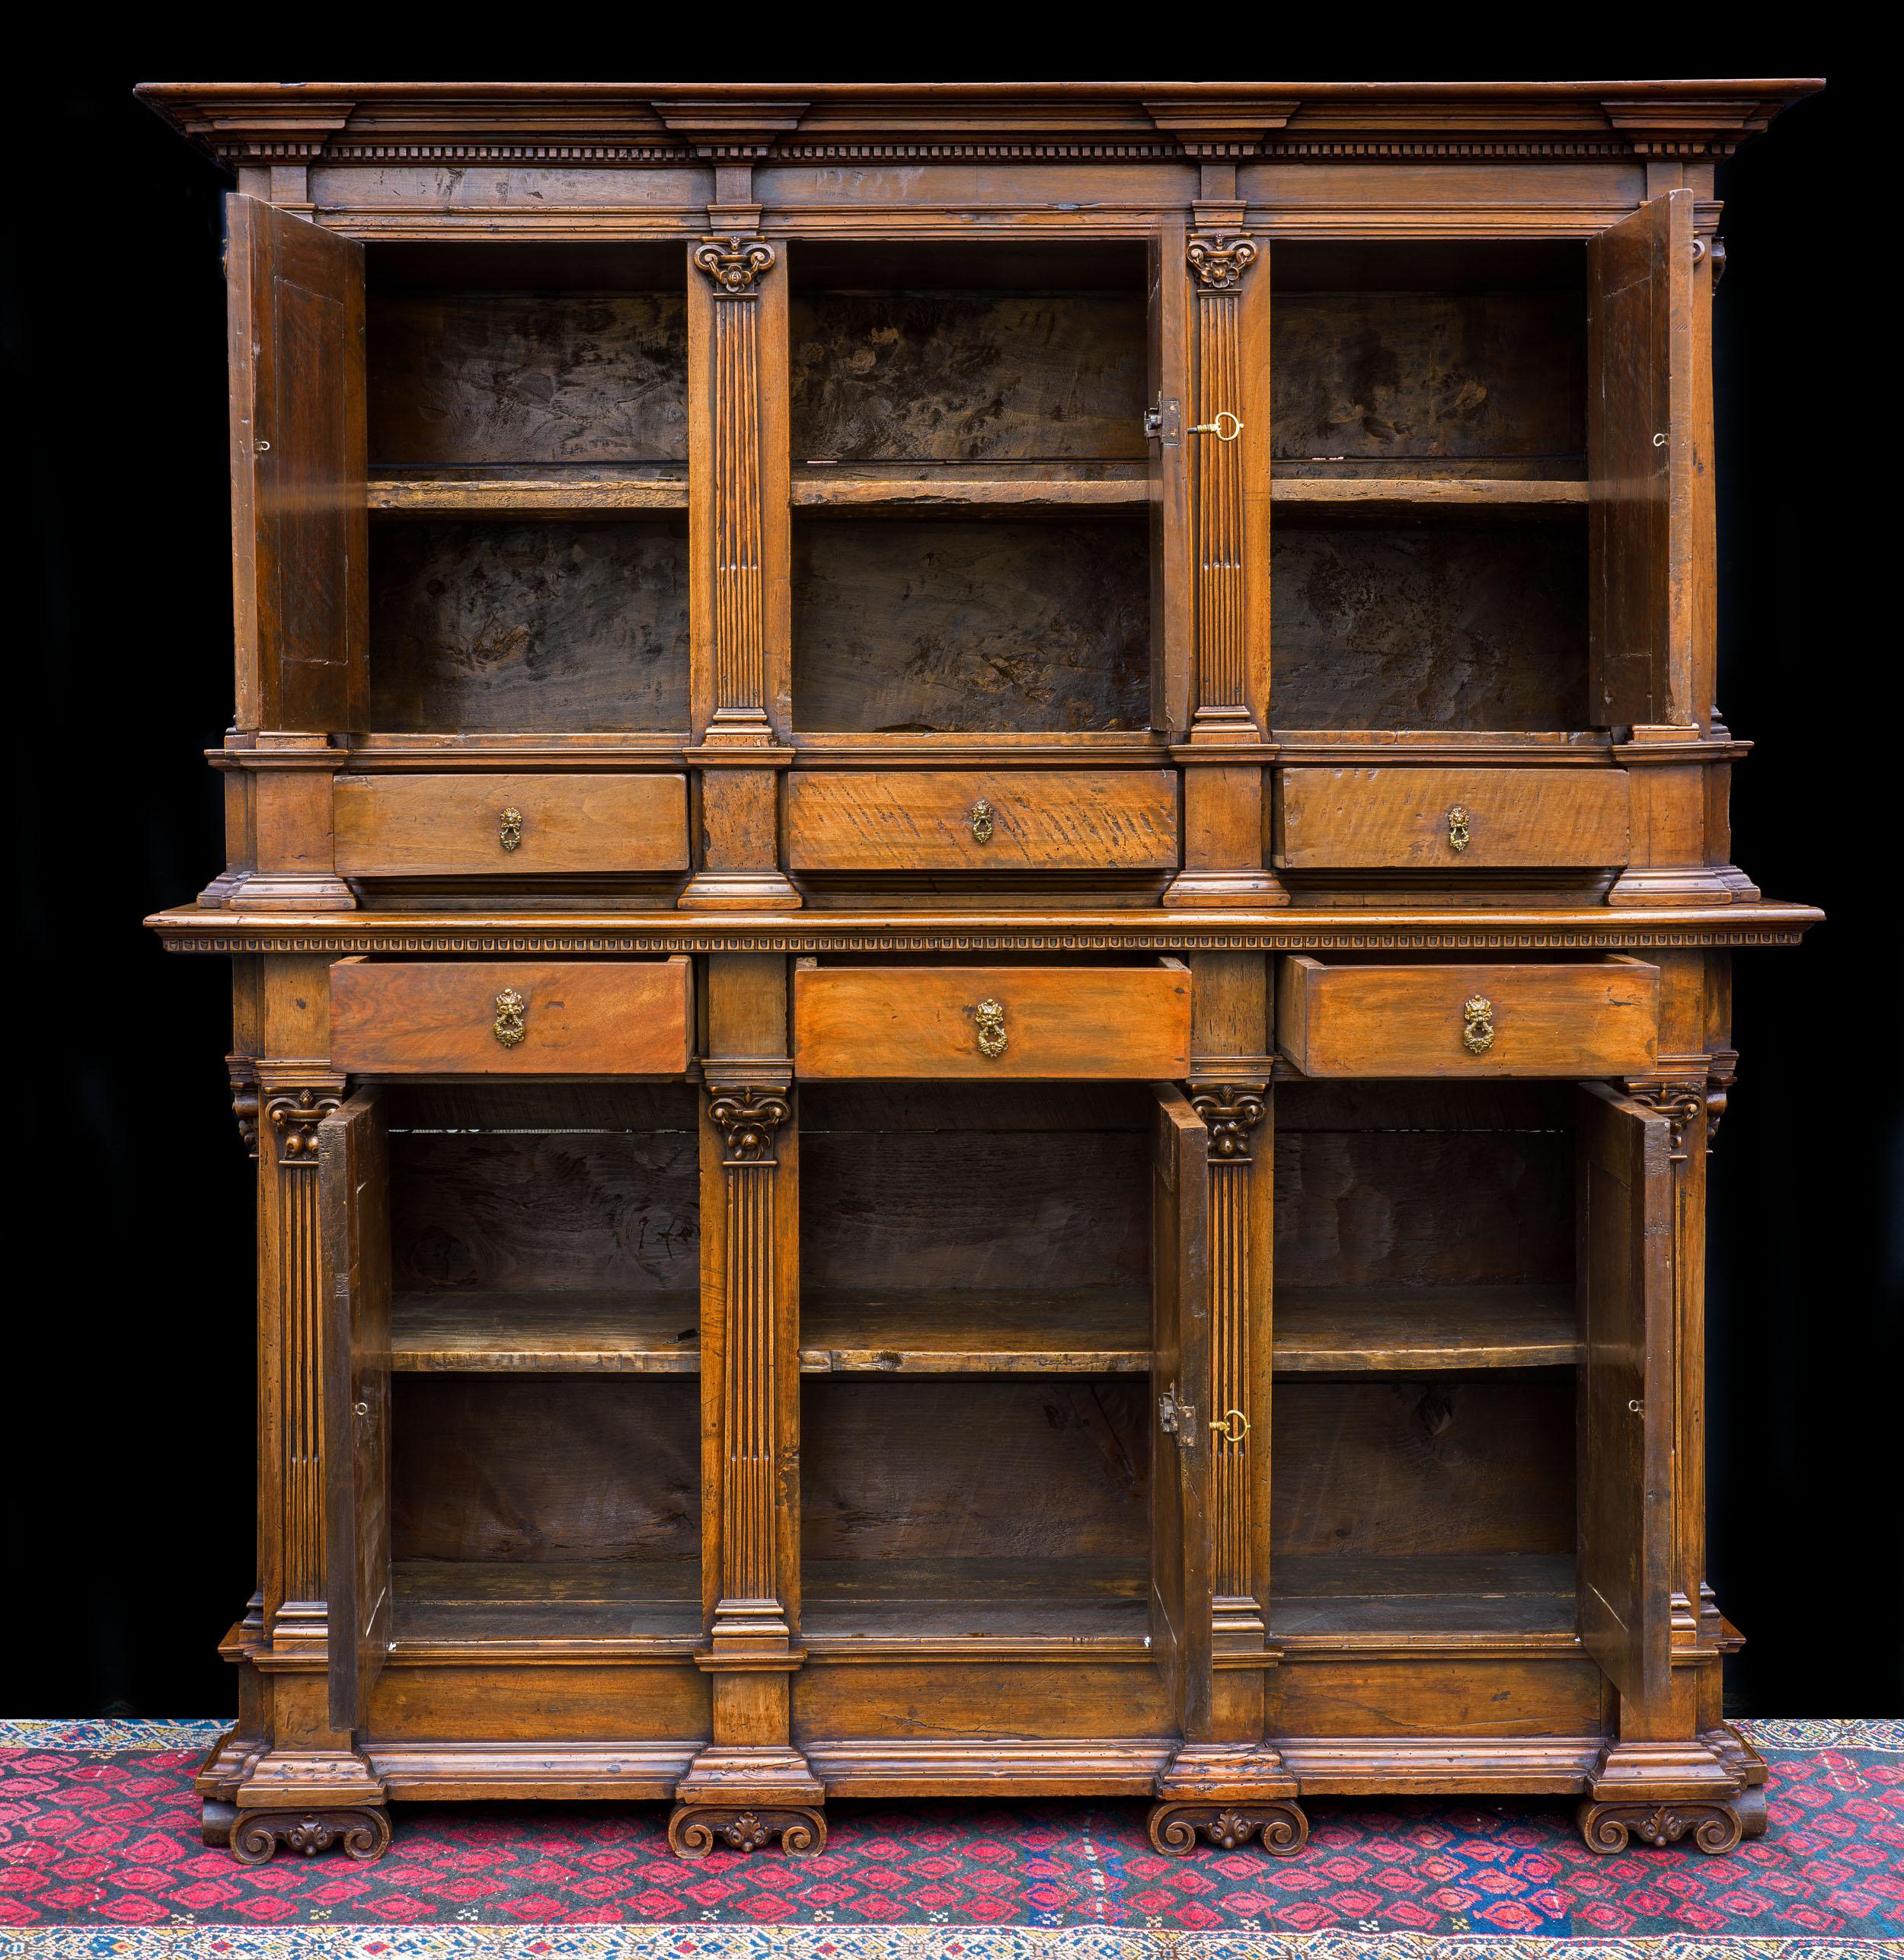 An exceptionally fine late Renaissance walnut cabinet from Tuscany. The two-part cabinet comprises an upper section of three cupboards concealing double shelves, and three drawers, divided by slender pilasters. The lower section is the inverse, and